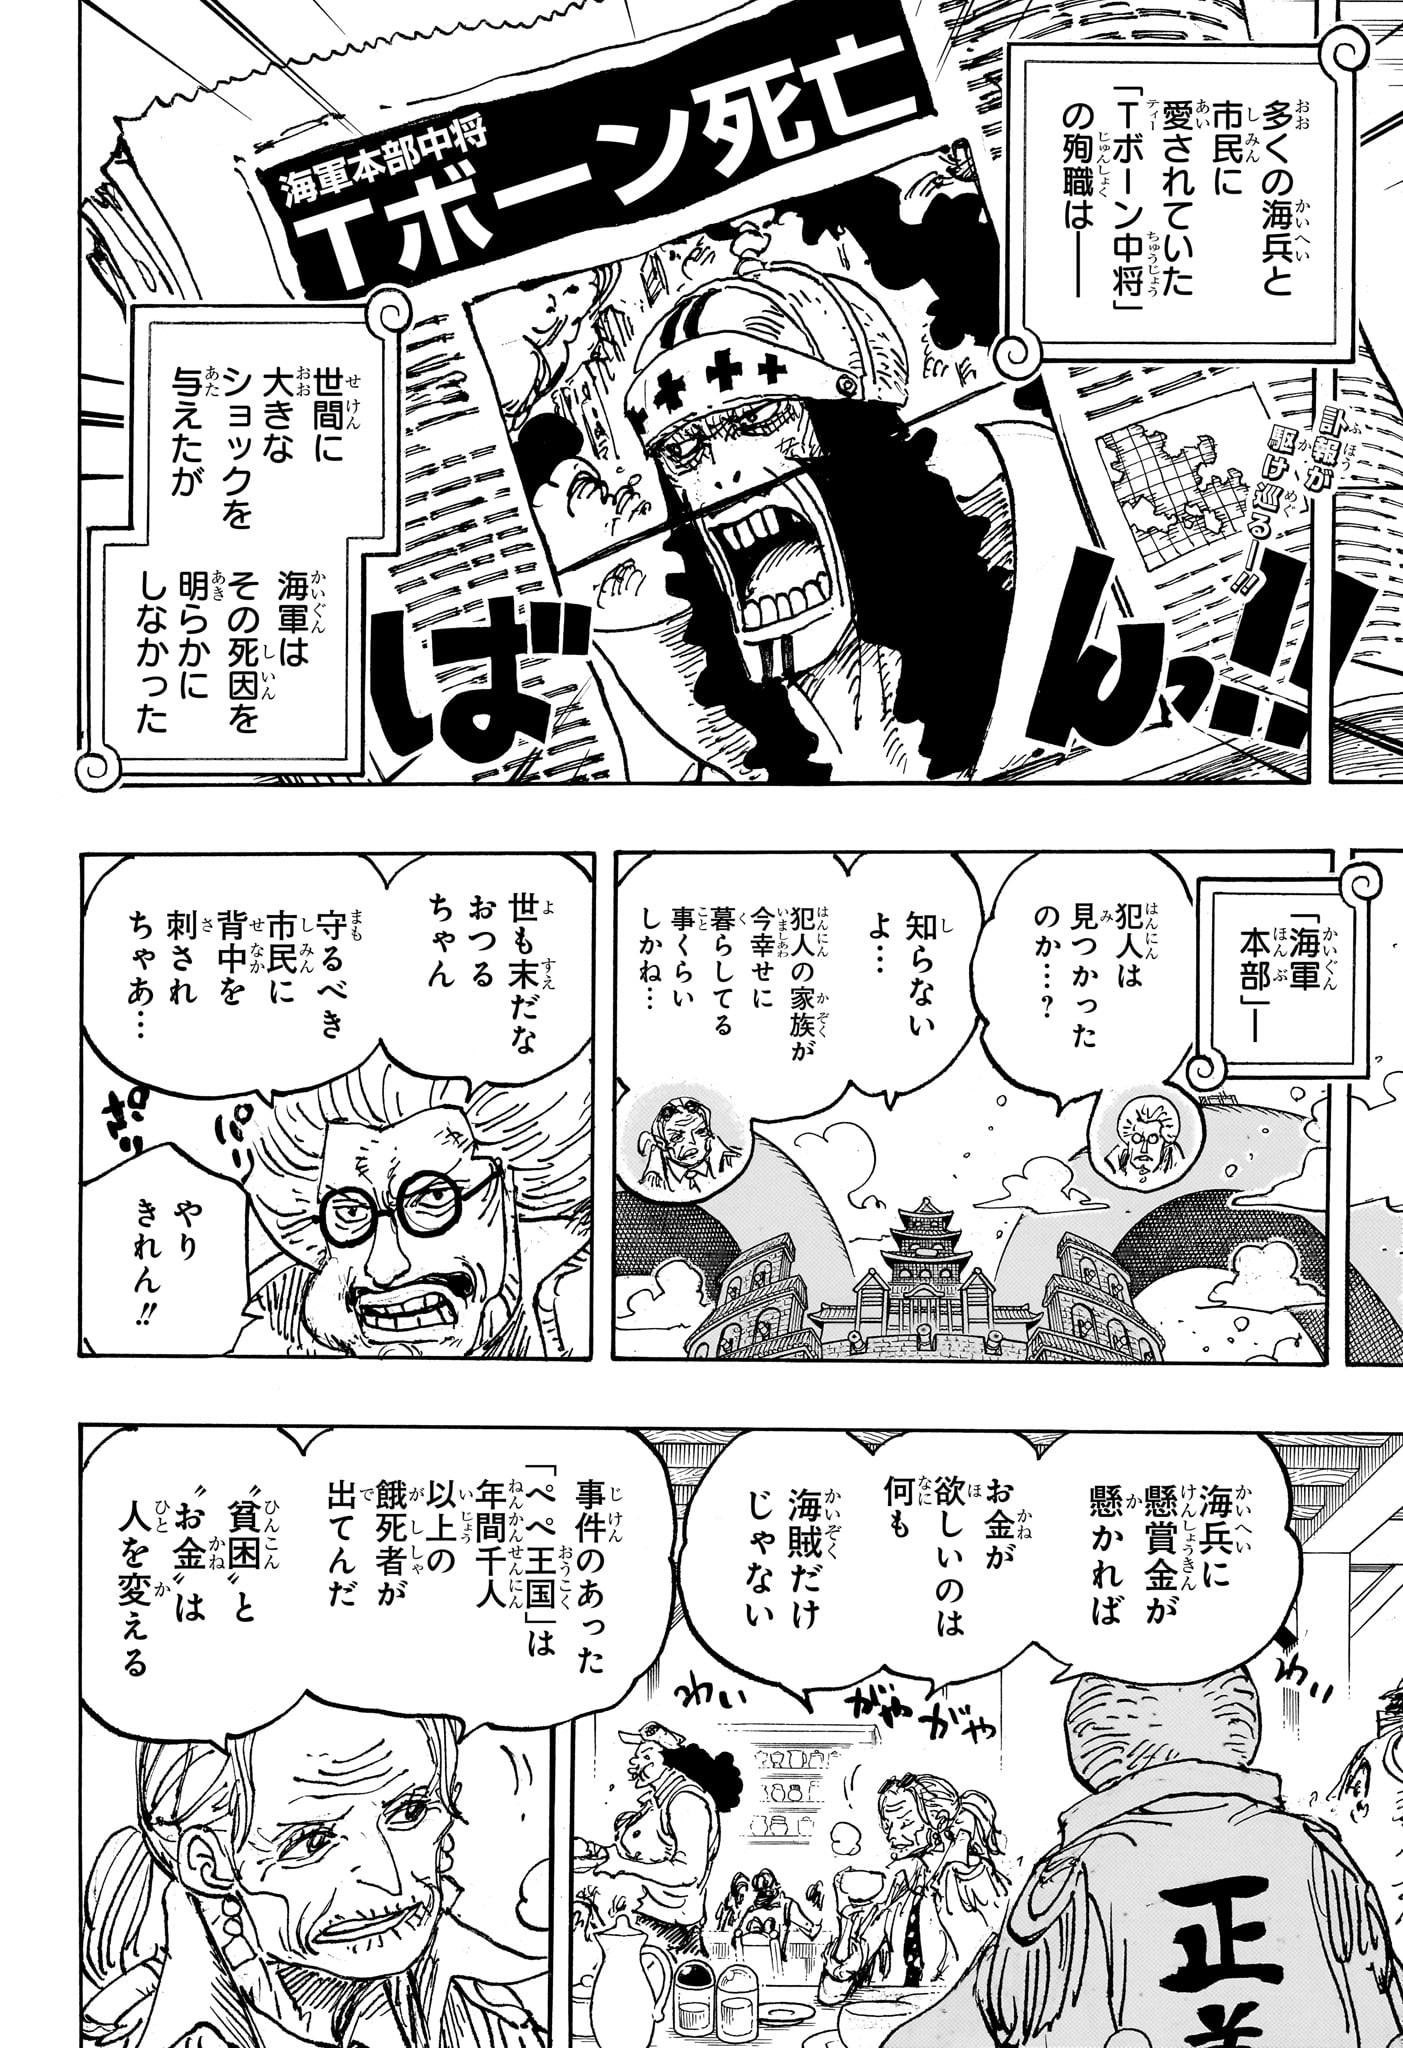 One Piece - Chapter 1082 - Page 2